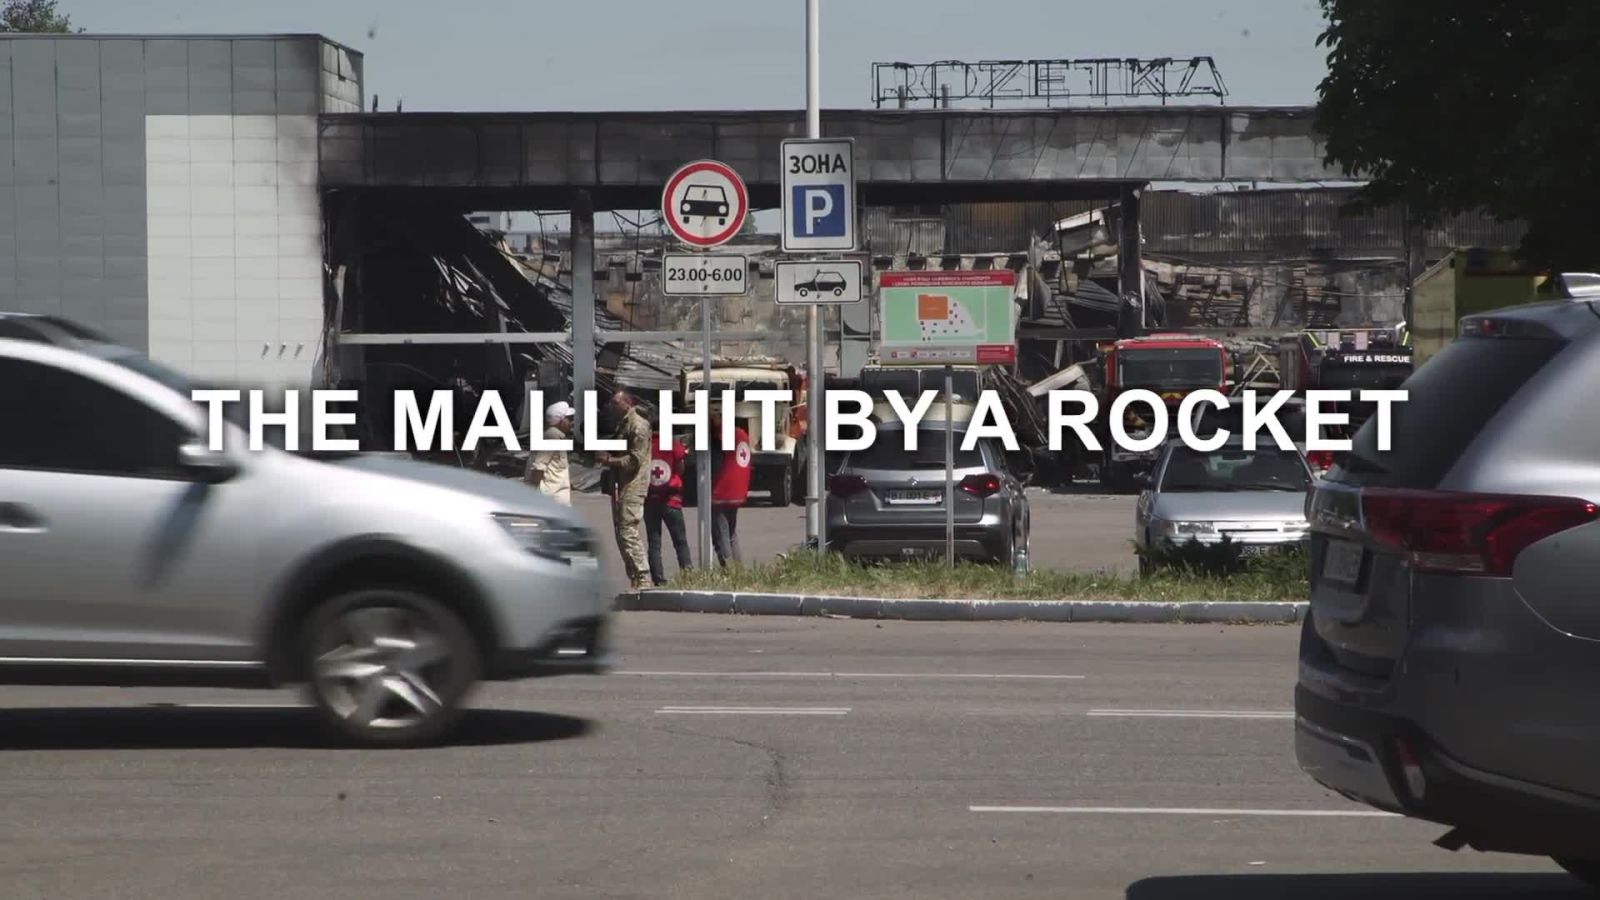 The Mall Hit By a Rocket